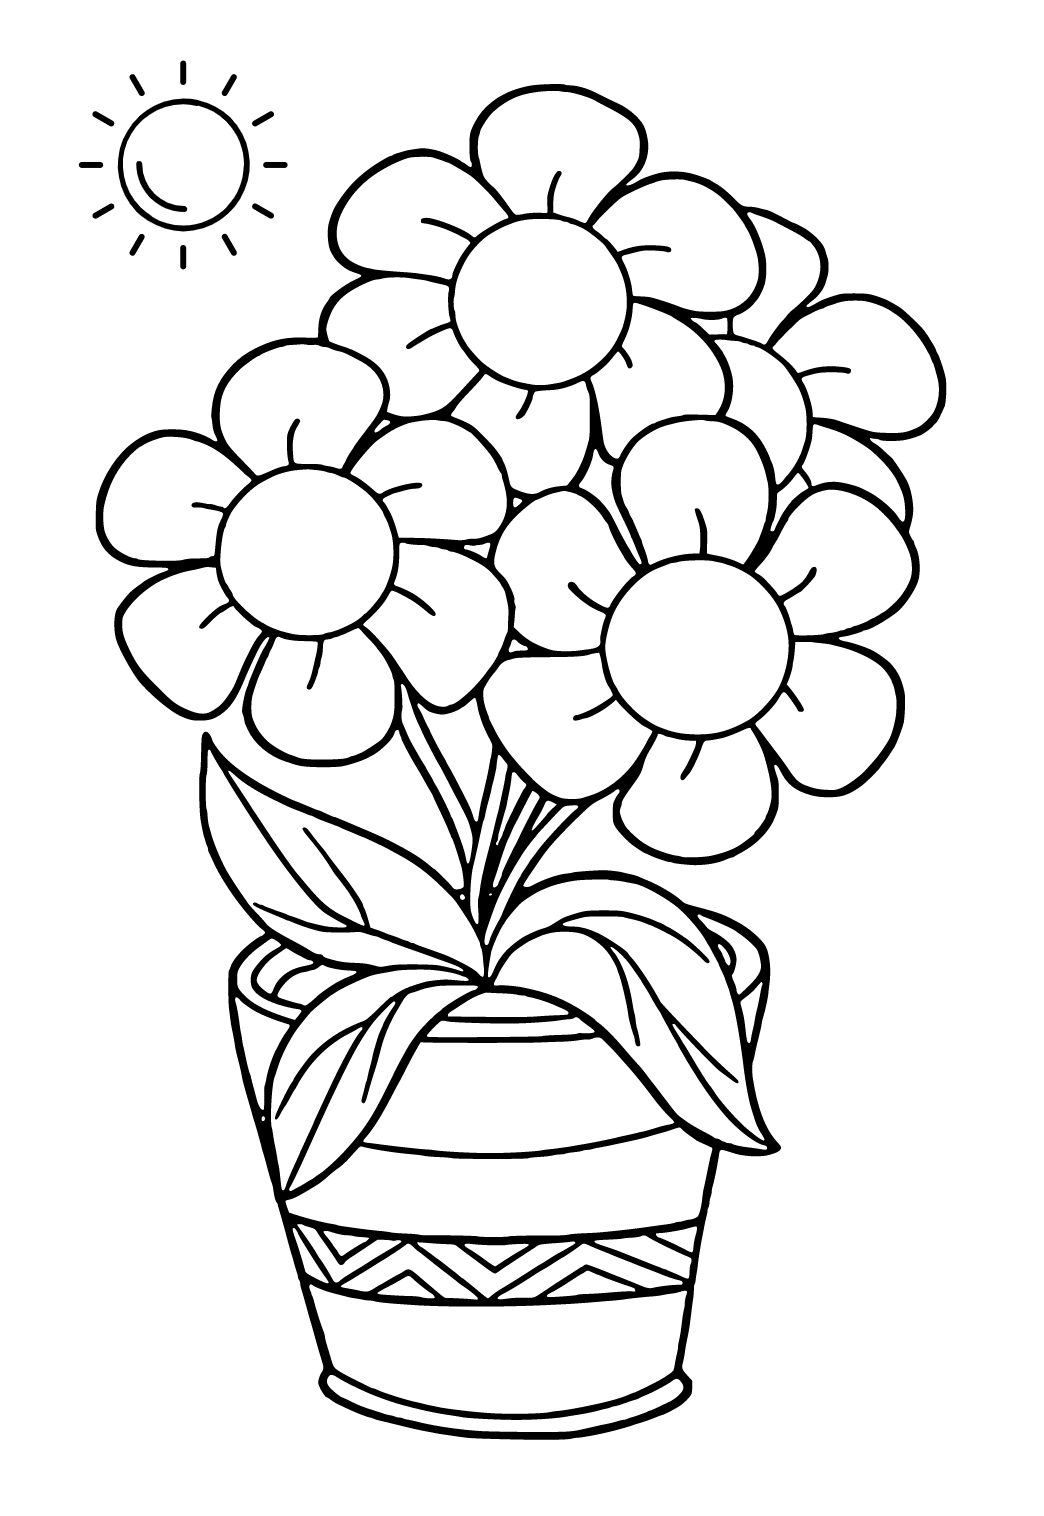 Free printable flower pot coloring page for adults and kids